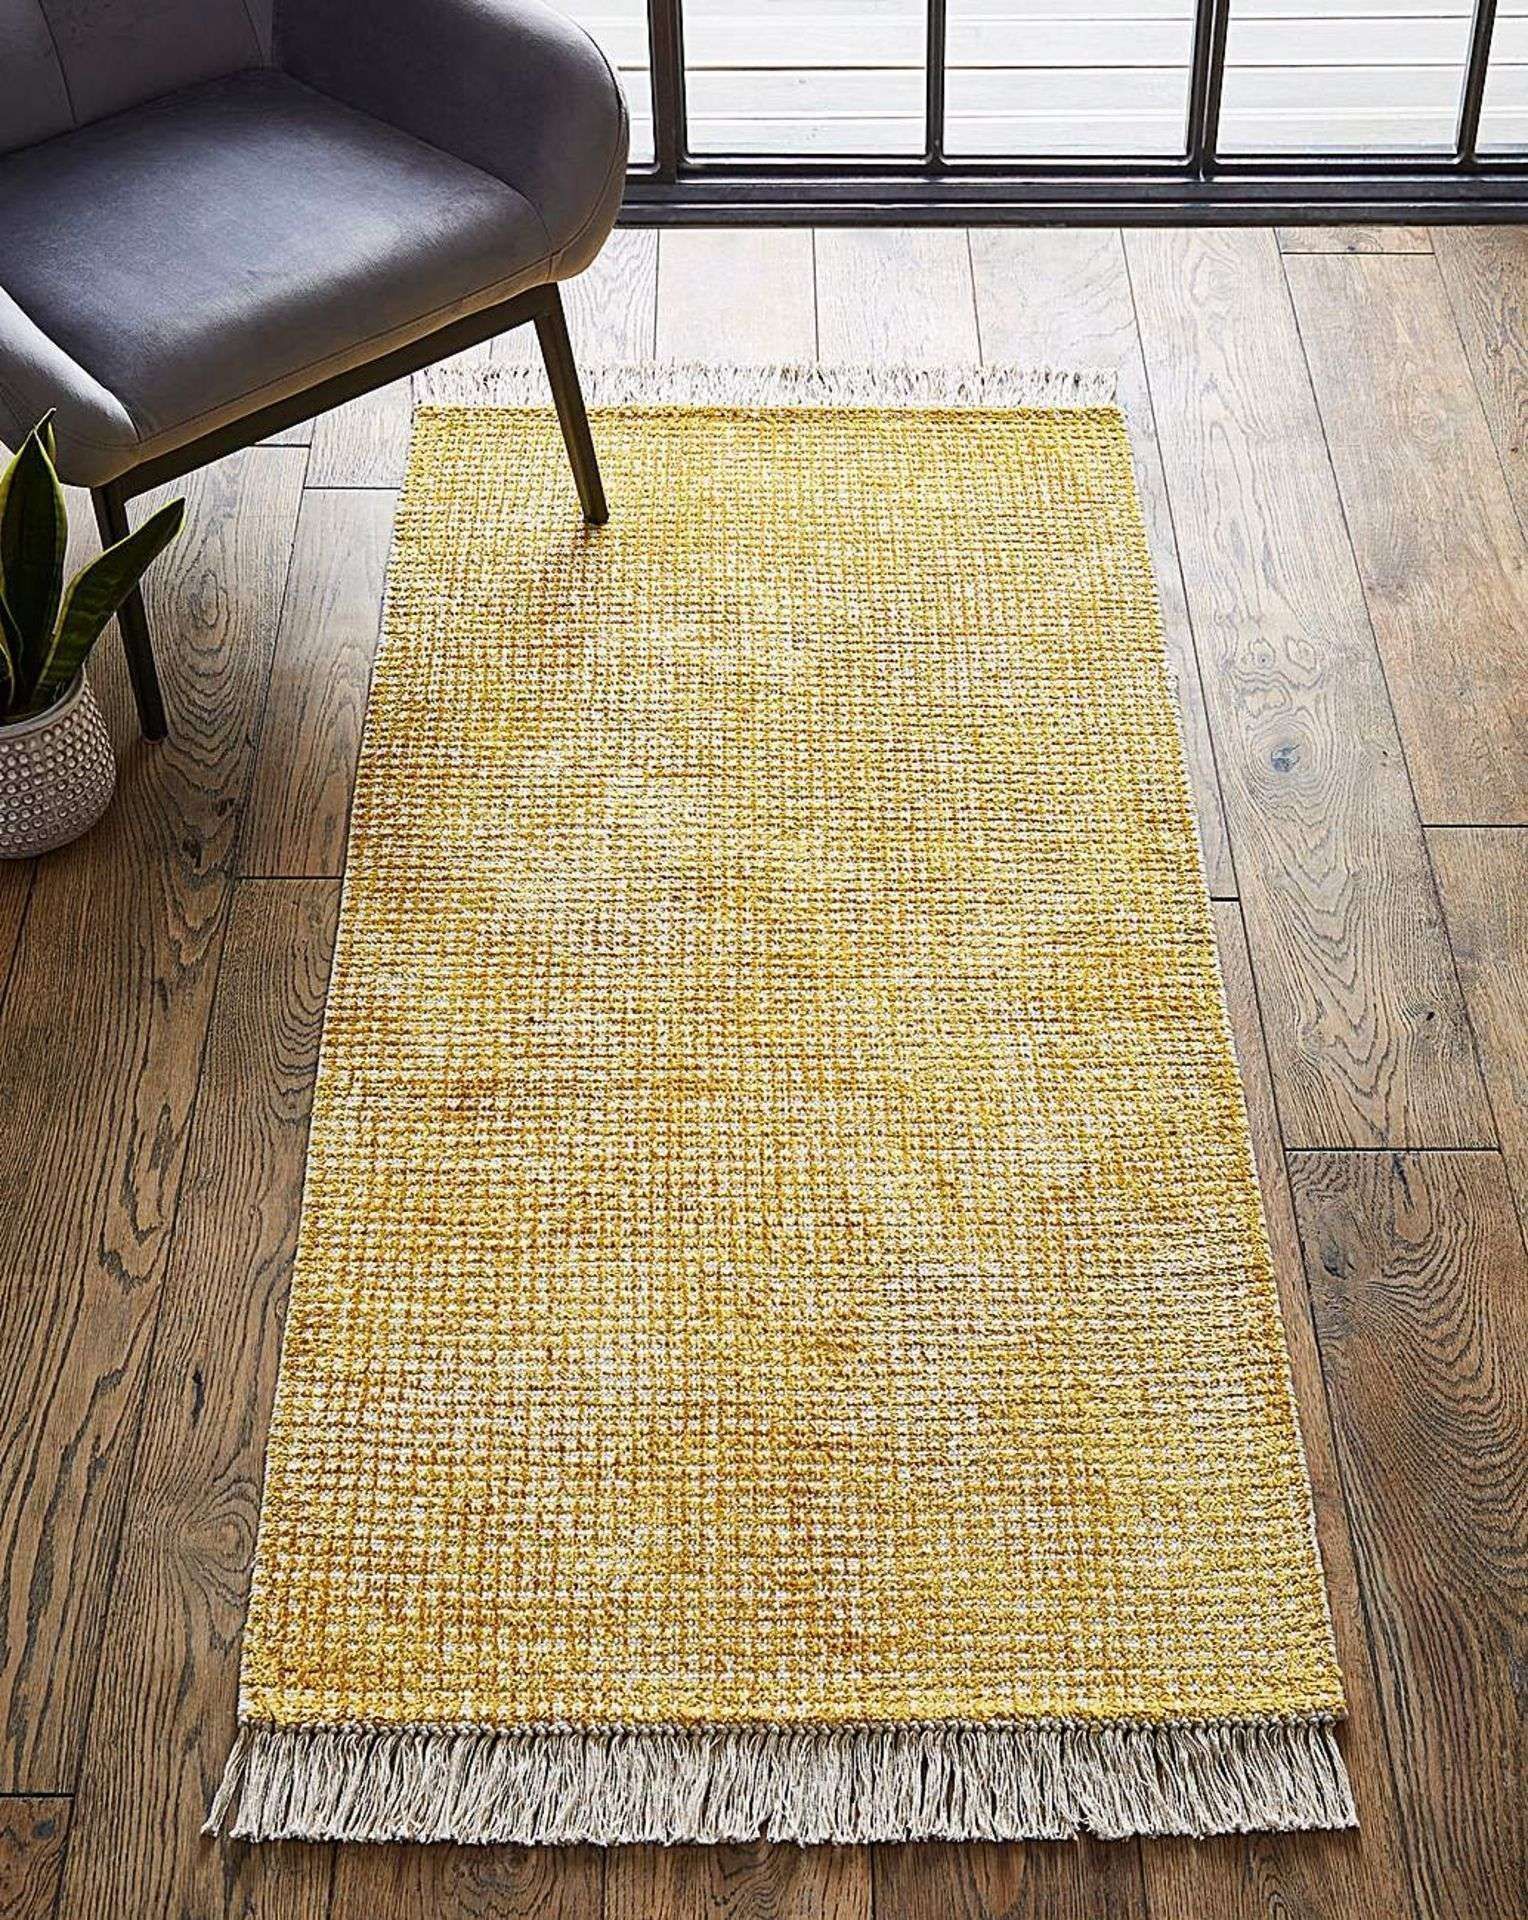 2x BRAND NEW Hallie Woven Fringe Rug 80CM X 150CM. NUGGET GOLD. RRP £69 EACH. A woven design that is